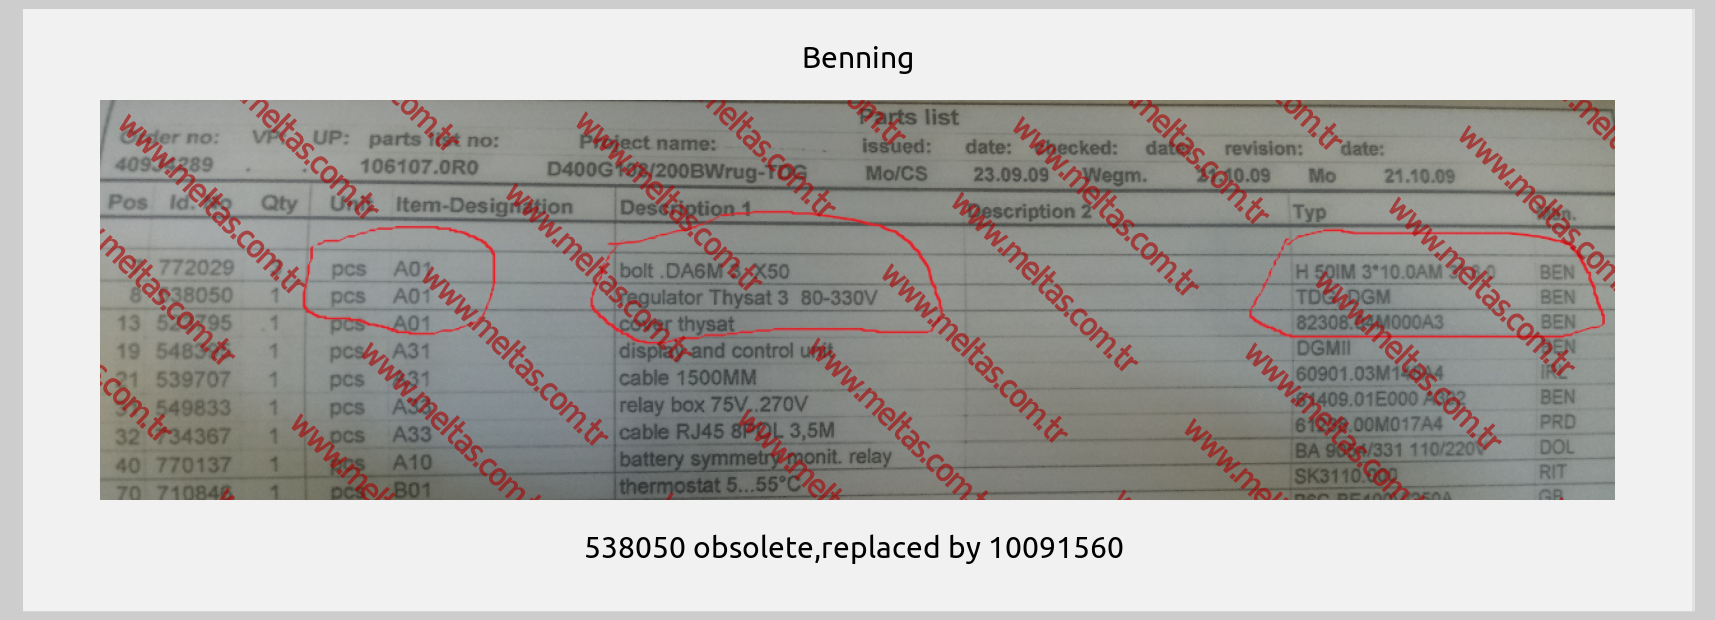 Benning - 538050 obsolete,replaced by 10091560 